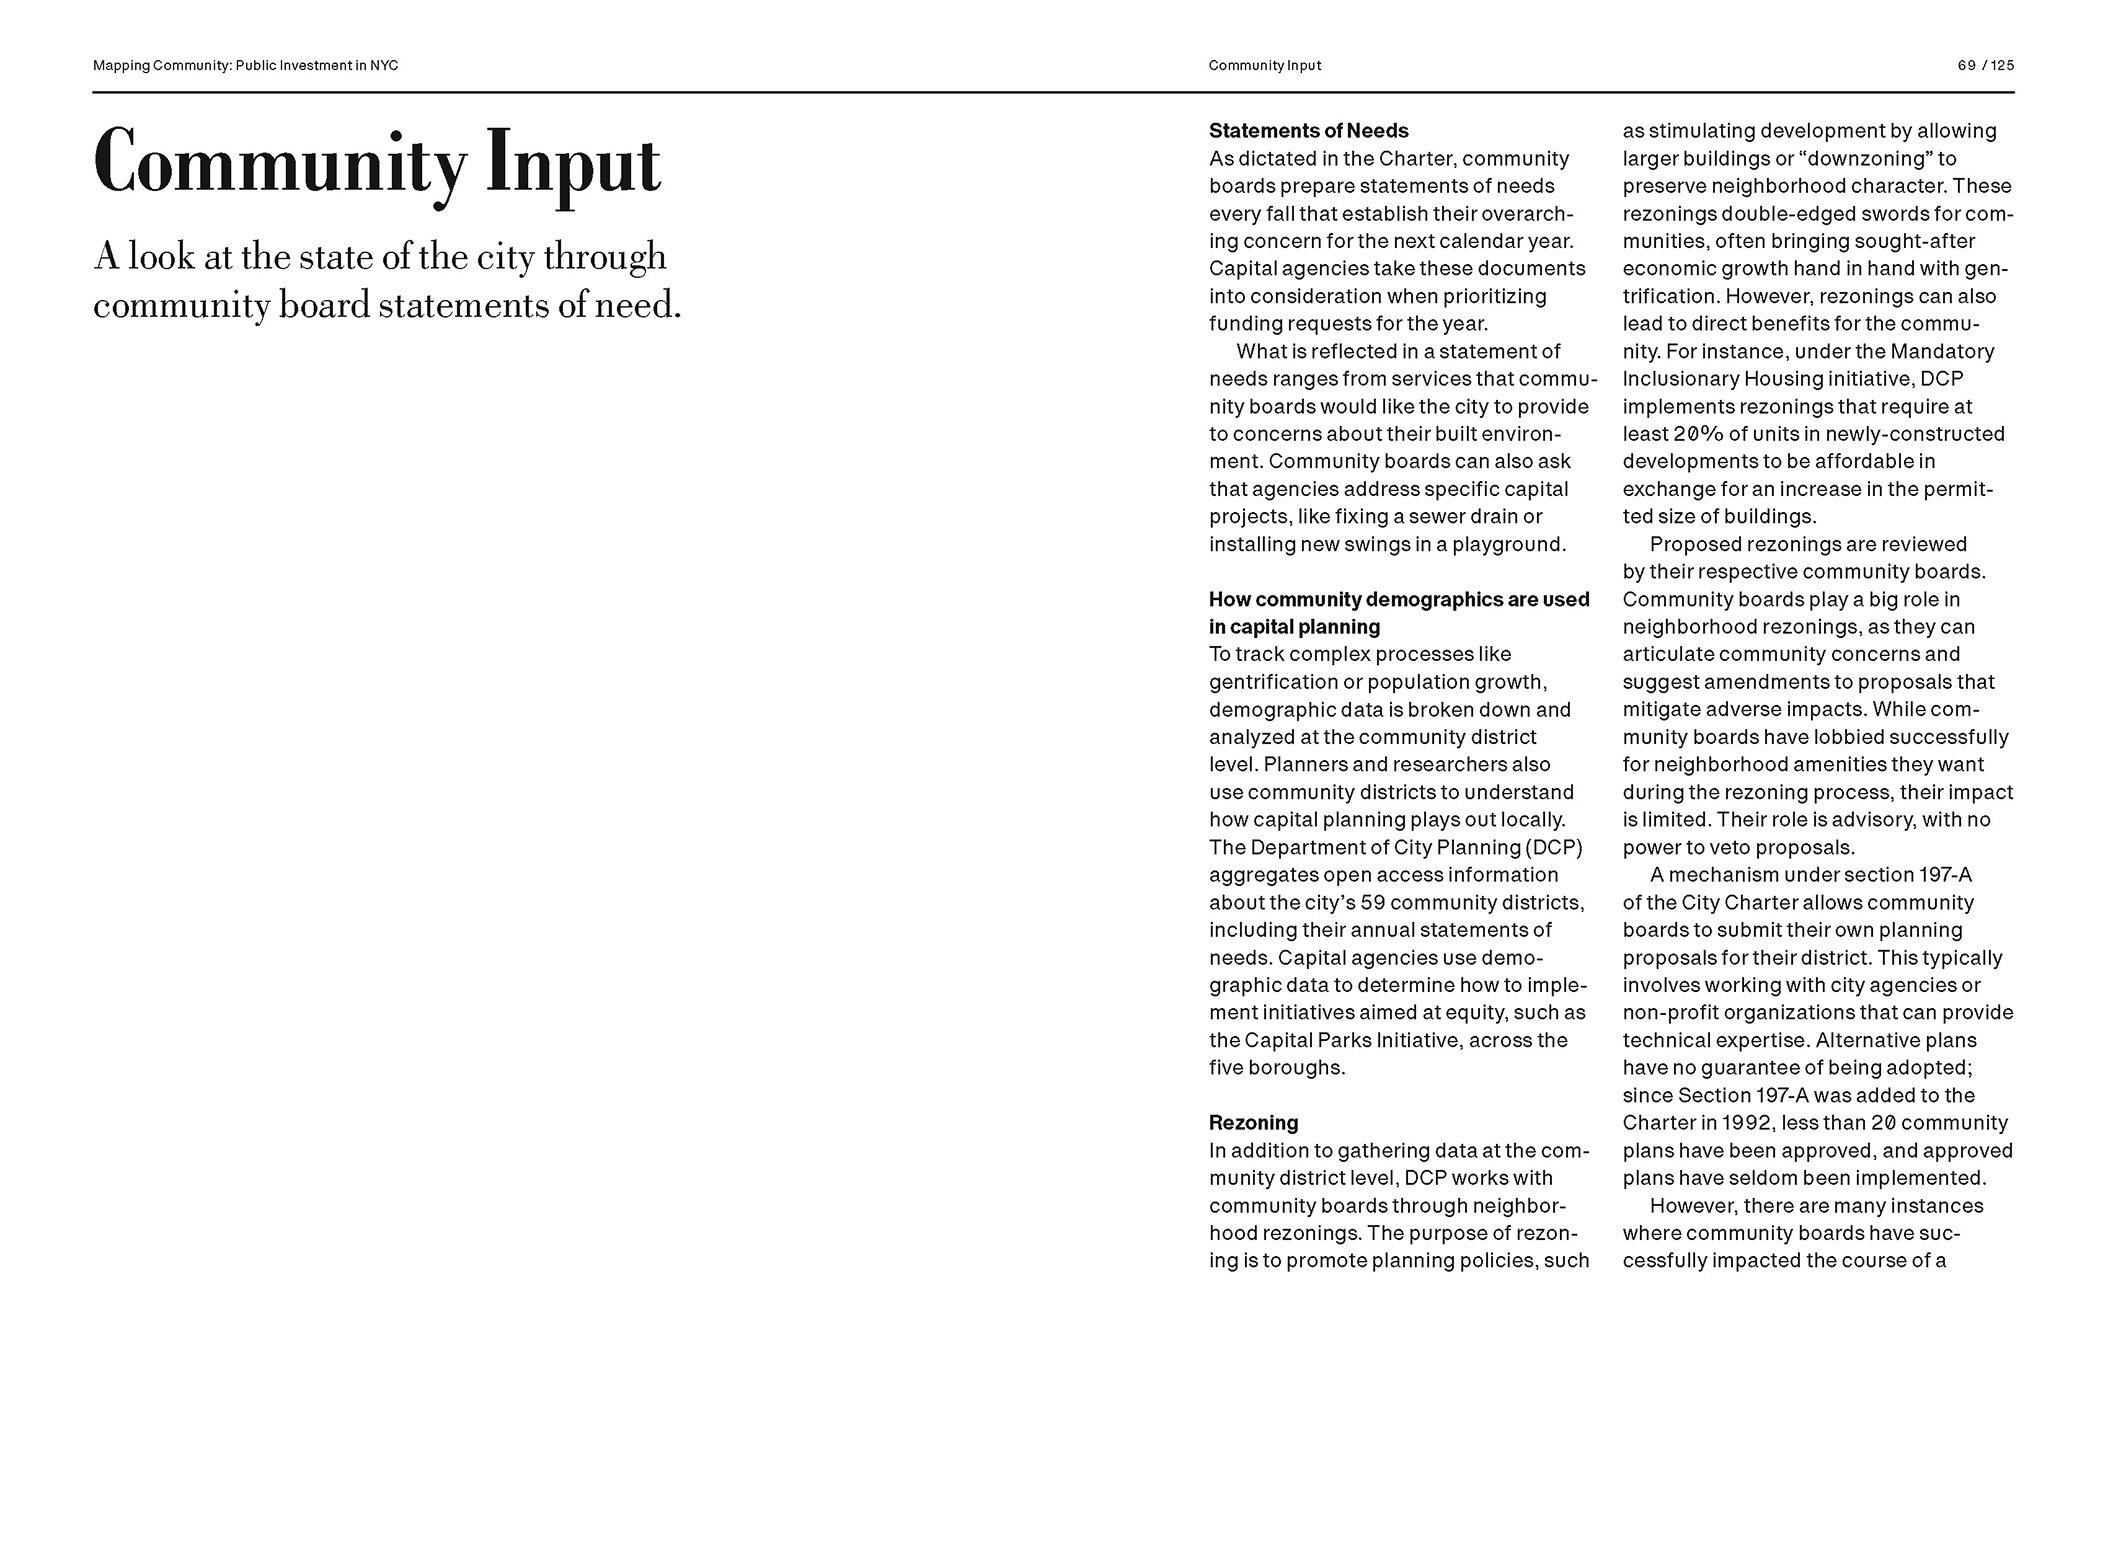 MAPPING COMMUNITY EXHIBT CATALOG_Page_35.jpg